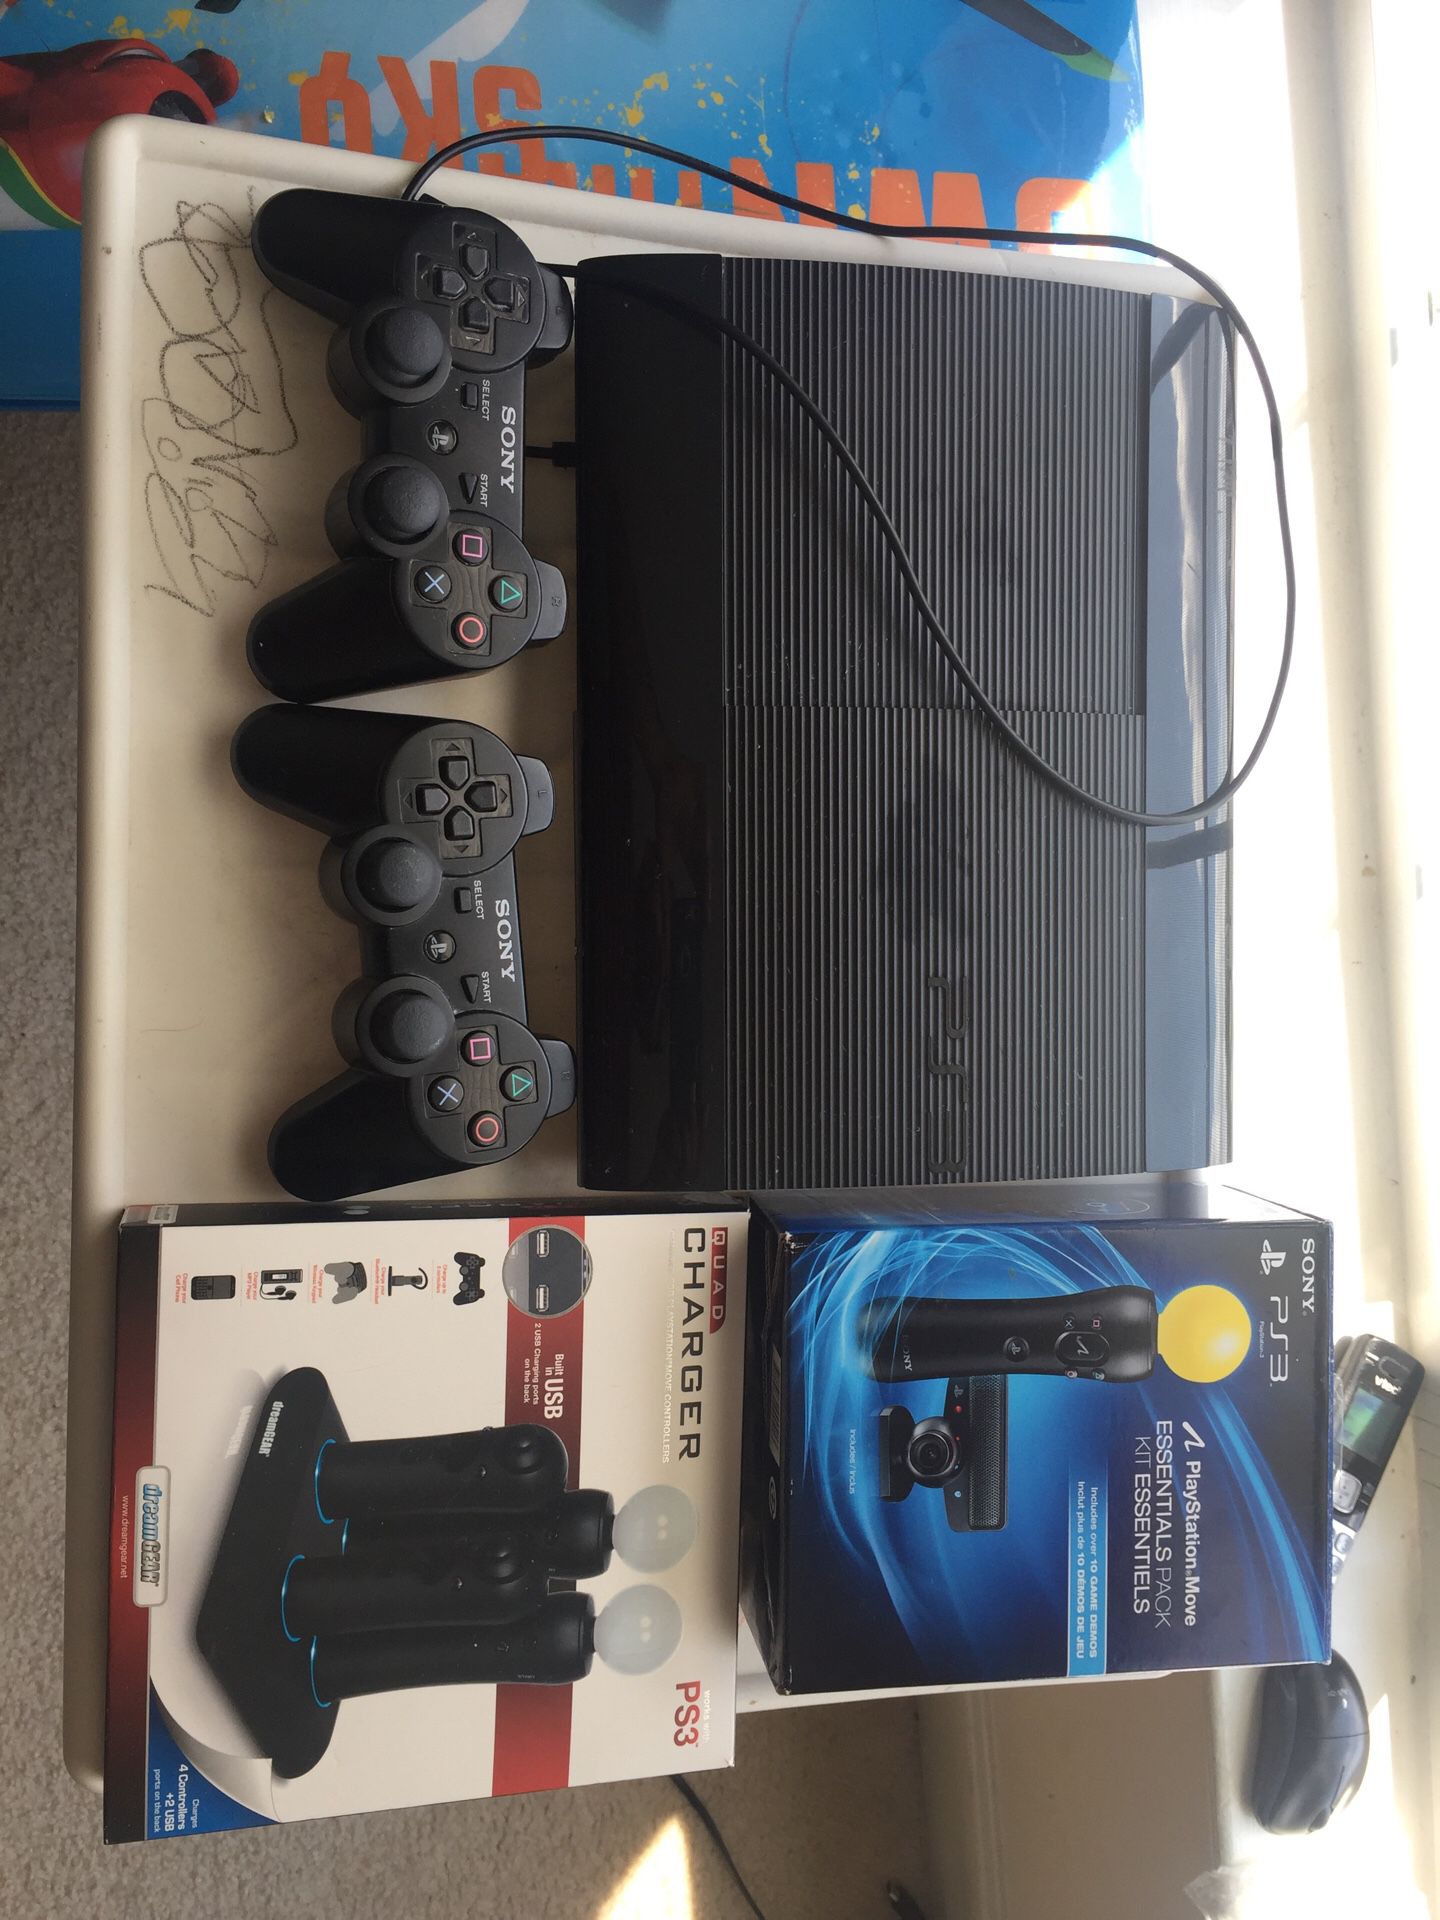 Used like New PS3 including all camera, controllers with charger, Game CDs